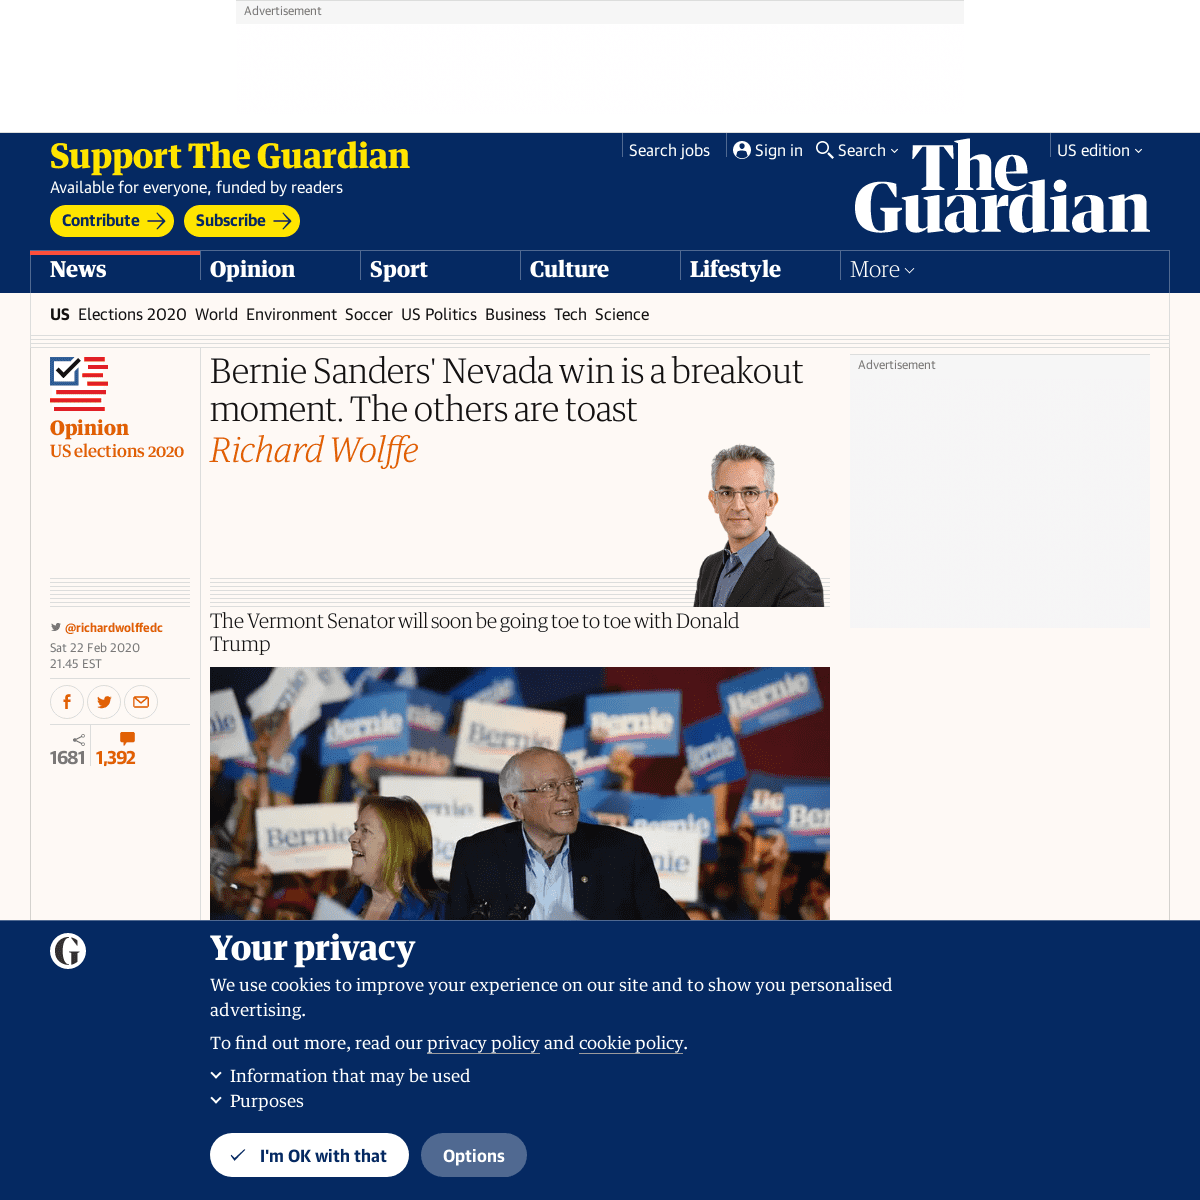 A complete backup of www.theguardian.com/commentisfree/2020/feb/22/bernie-sanders-nevada-win-is-a-breakout-moment-the-others-are